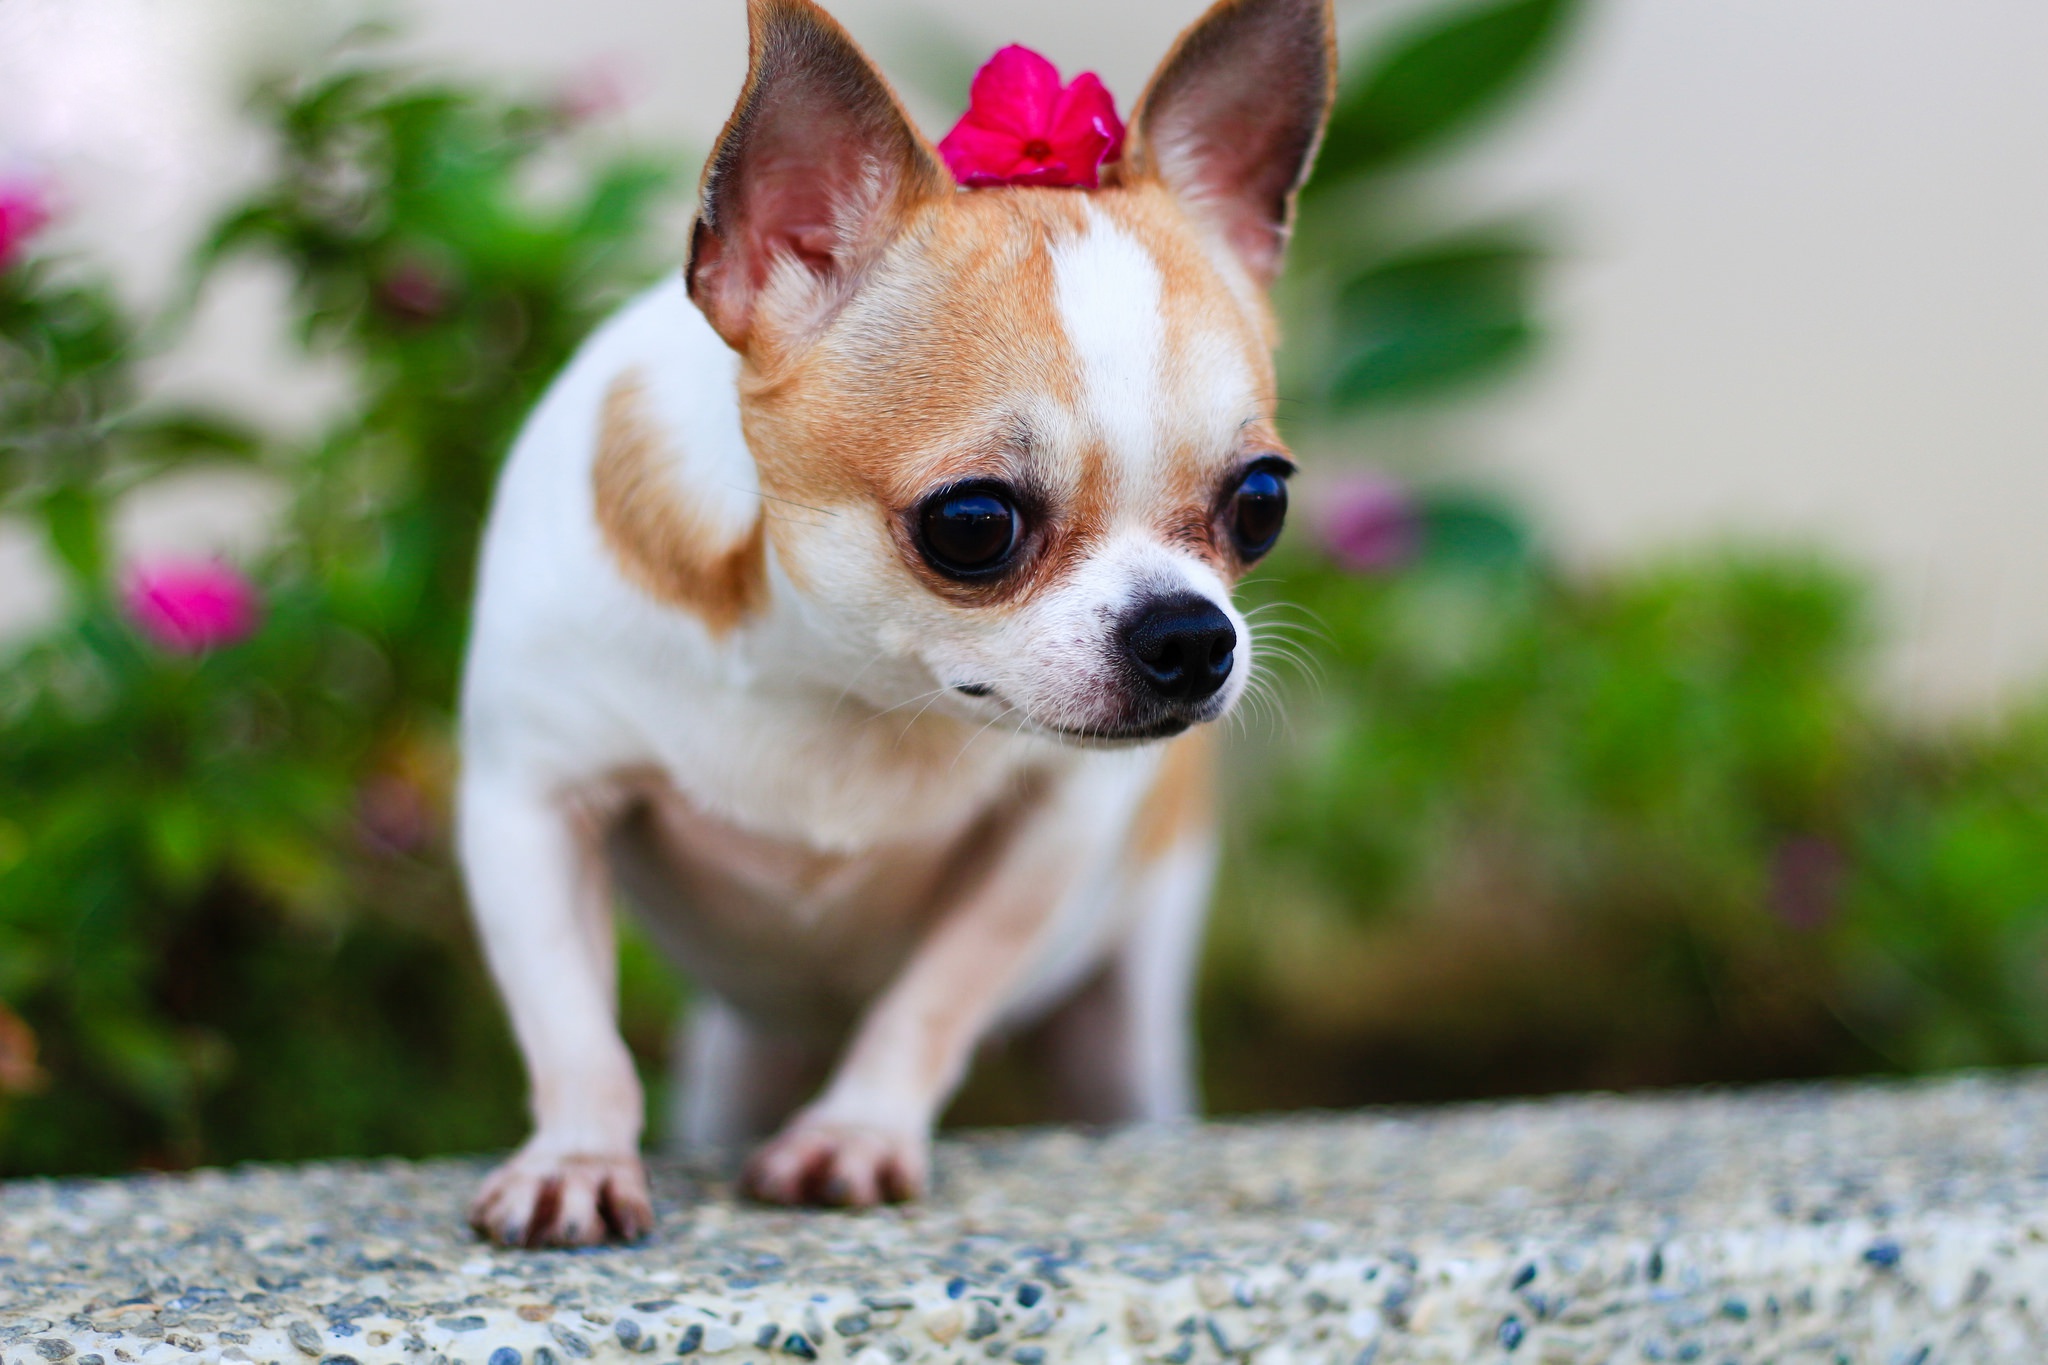 General 2048x1365 animals dog chihuahua depth of field